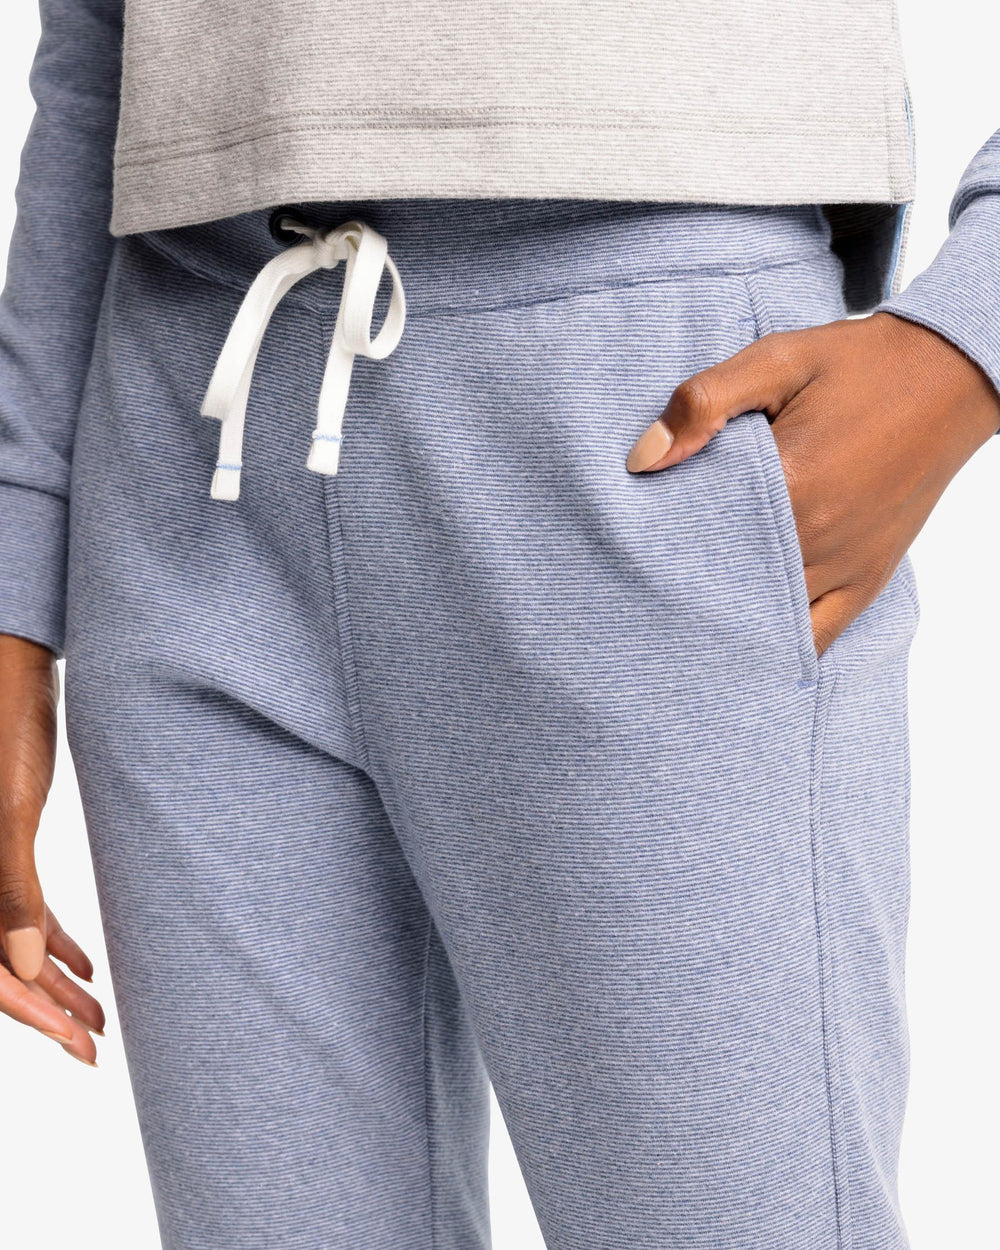 The detail view of the Kelby Heather Stripe Jogger by Southern Tide - Heather Seven Seas Blue